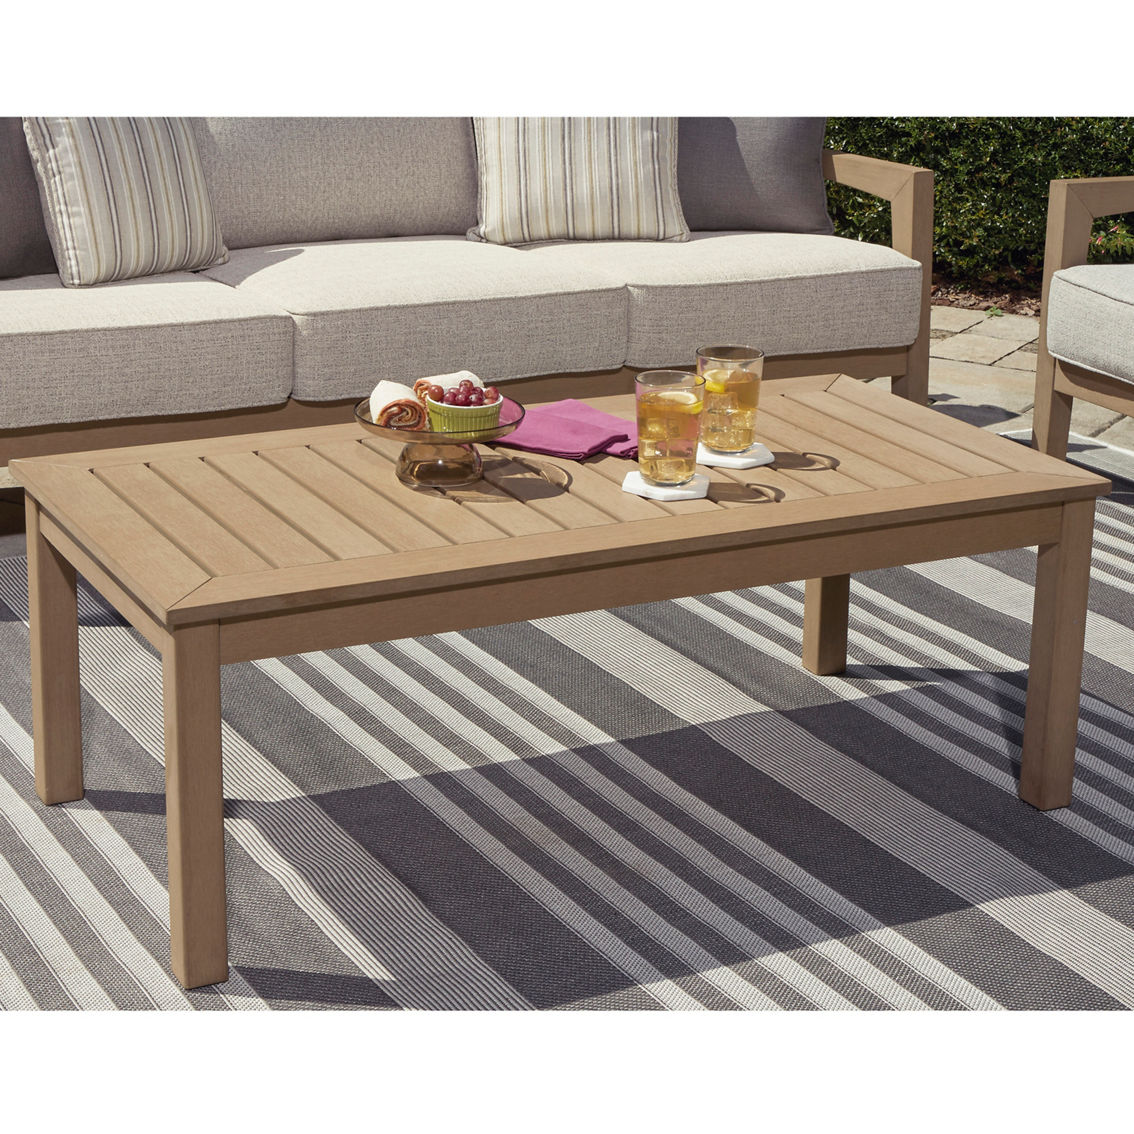 Signature Design by Ashley Hallow Creek Outdoor Coffee Table - Image 4 of 5